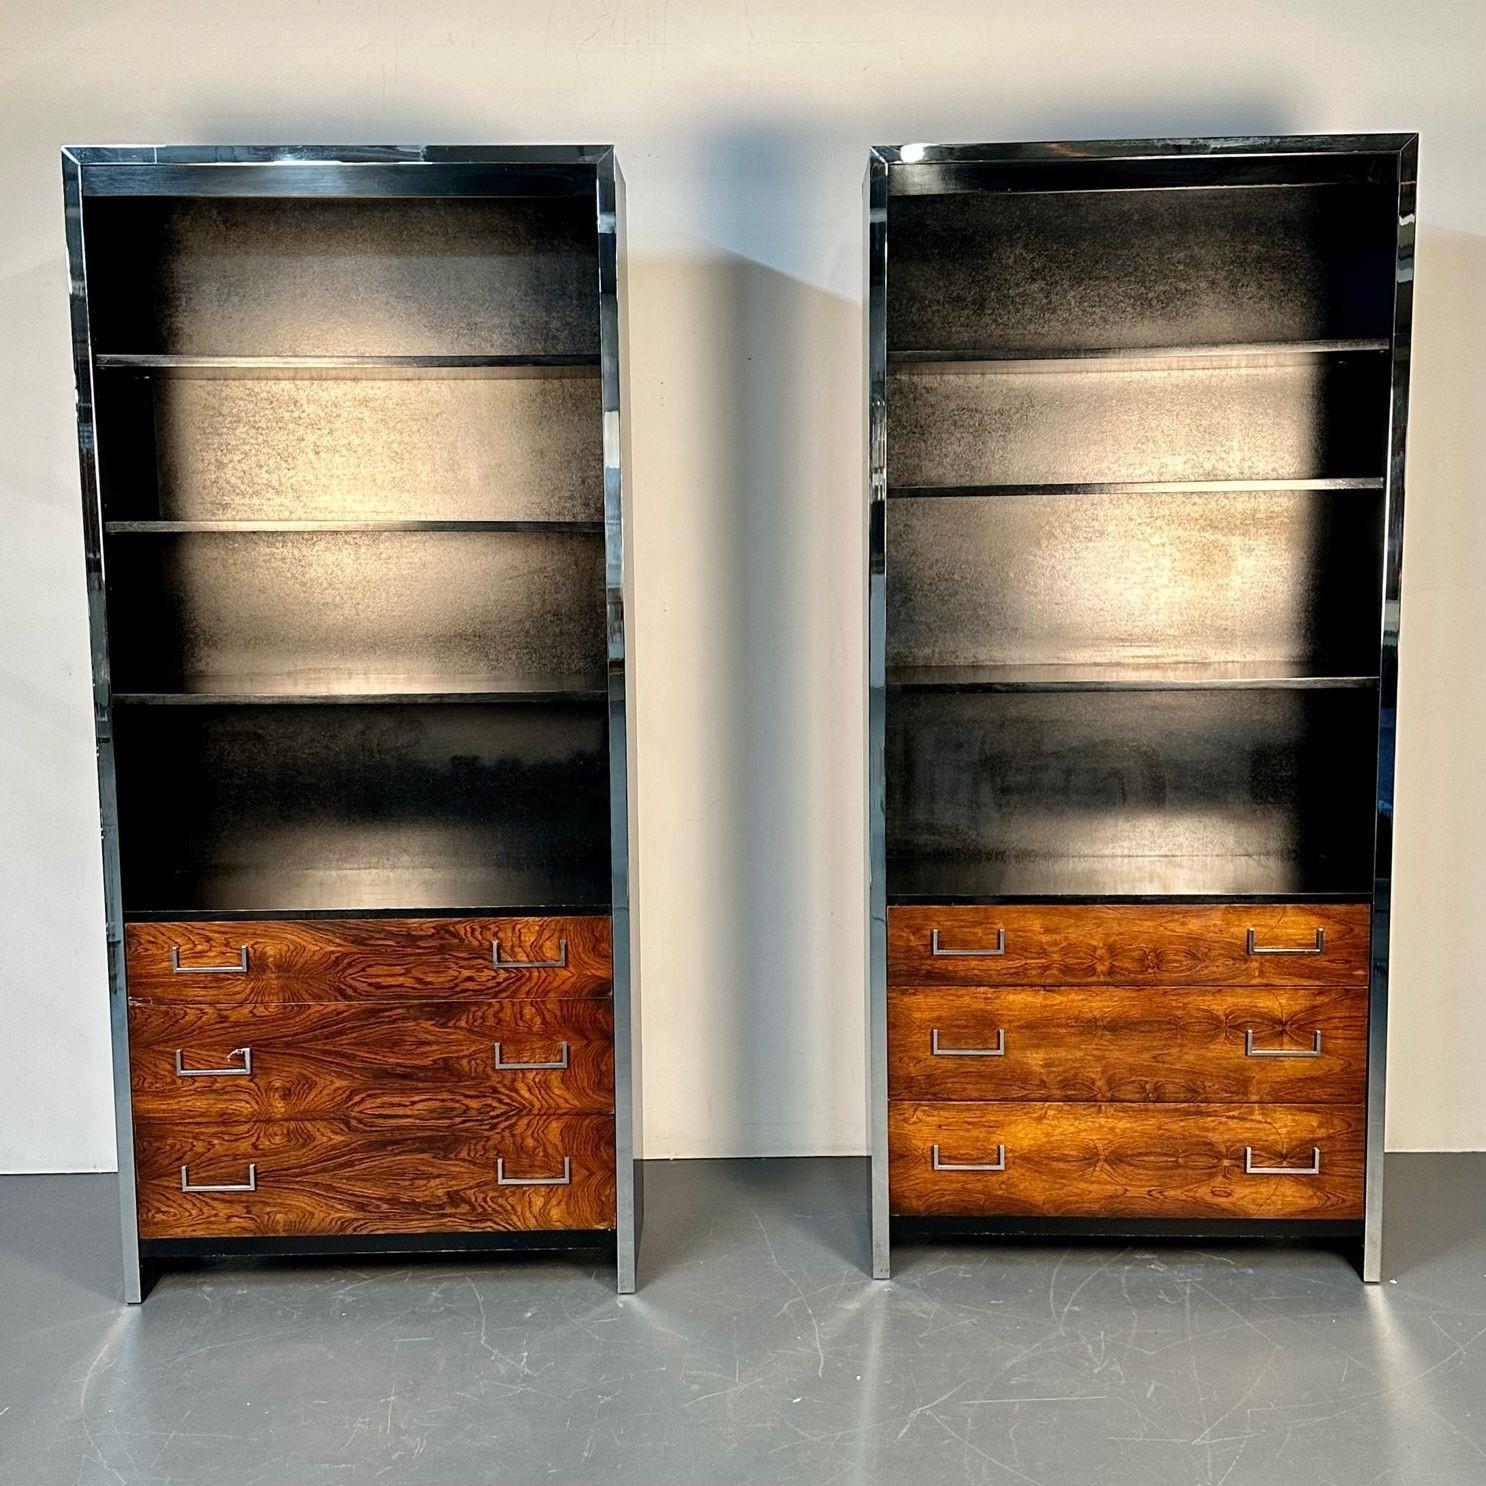 Pair Mid-Century Modern Bookcases / Shelving Unit, Milo Baughman for John Stuart
 
Set of mid-century shelving units designed by Milo Baughman for John Stuart circa 1950s. Each bookcase having three rosewood front drawers, ebonized top, sides, and